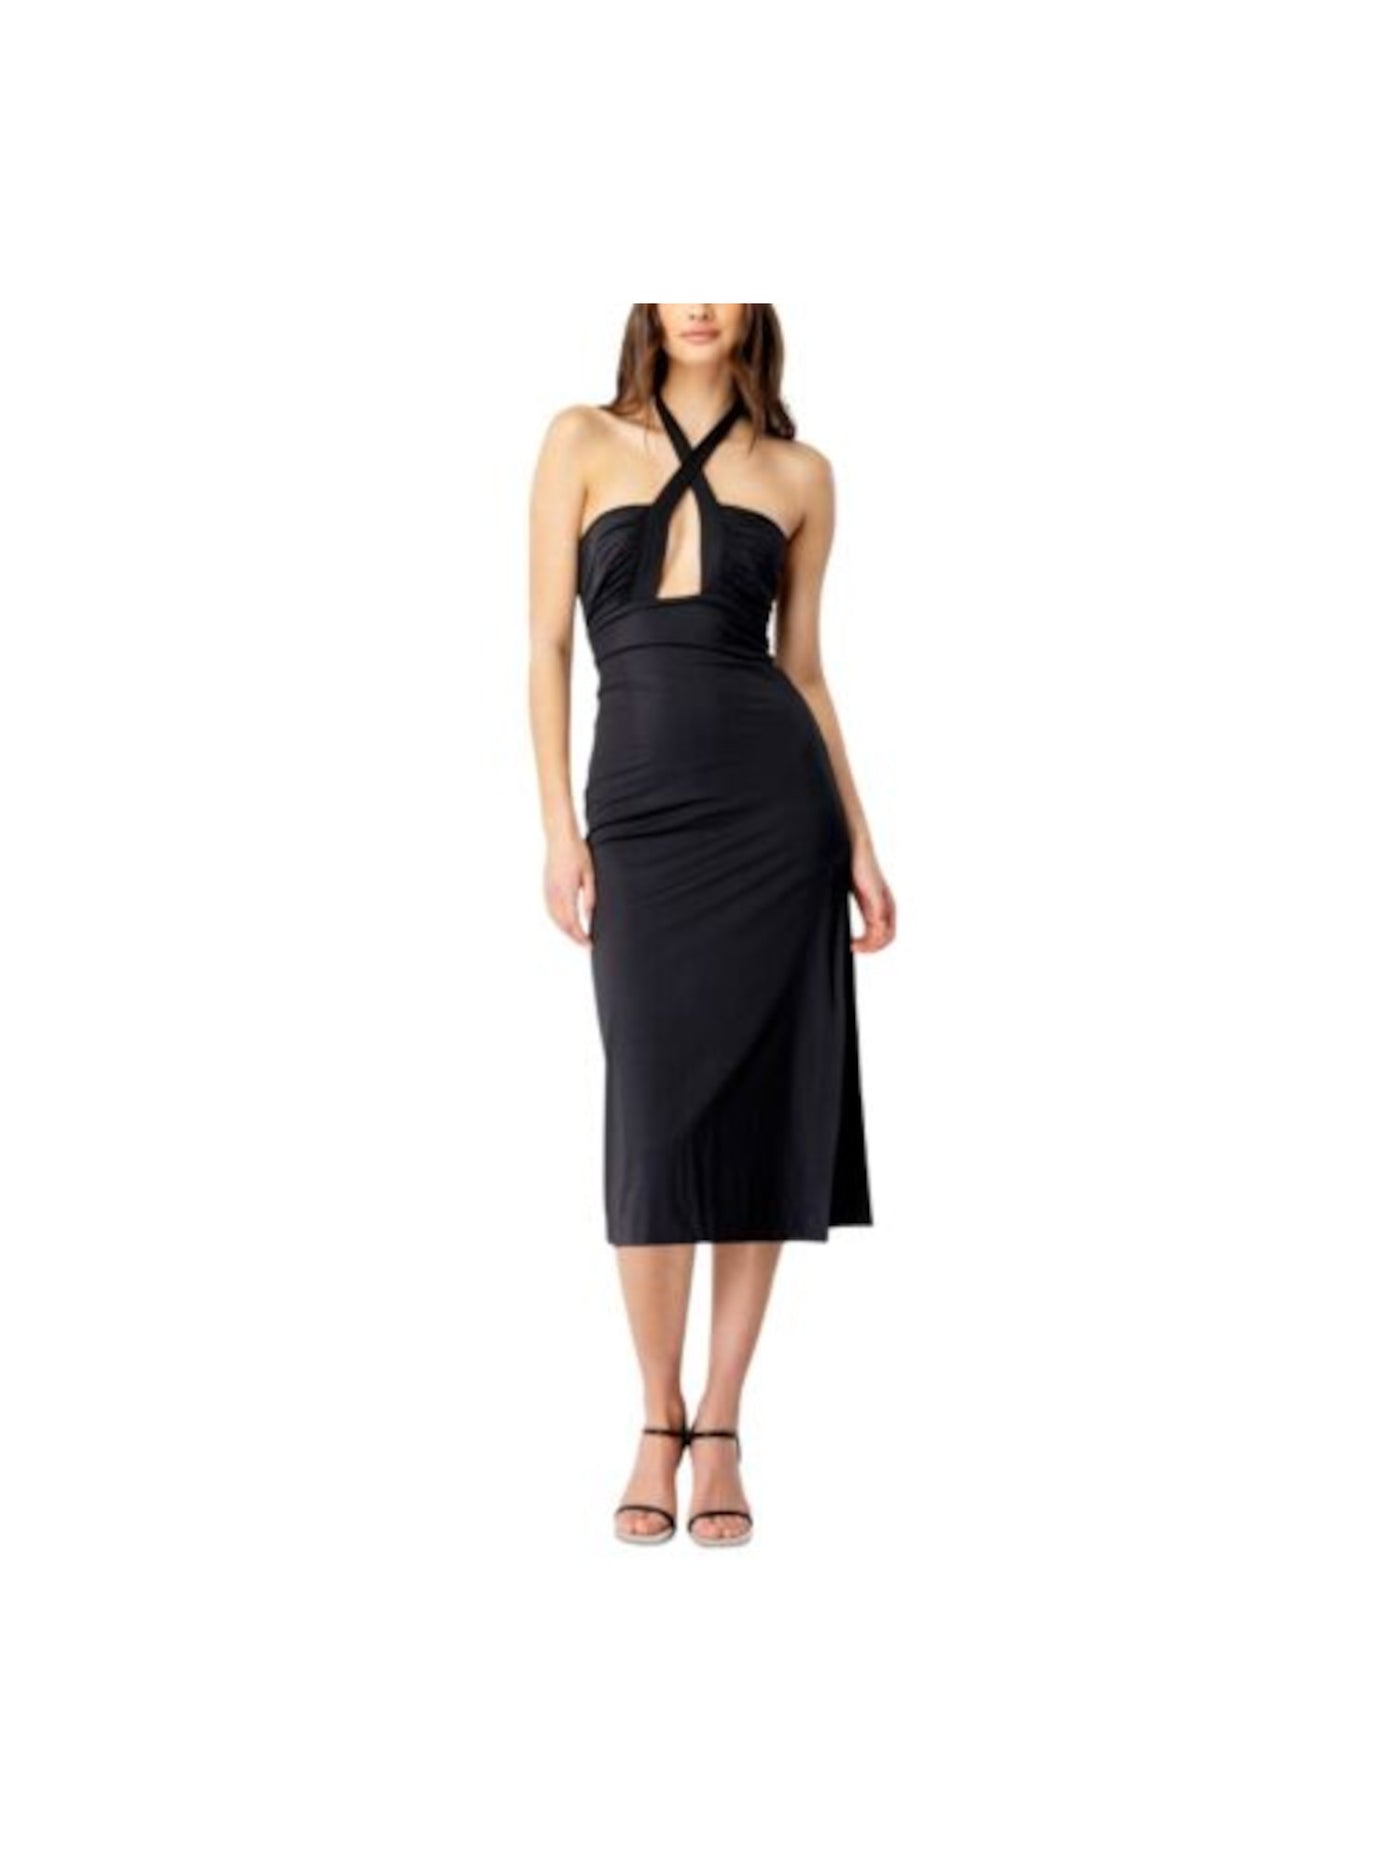 BARDOT Womens Black Zippered Cut Out Gathered Tie Slitted Lined Sleeveless Halter Midi Cocktail Sheath Dress M